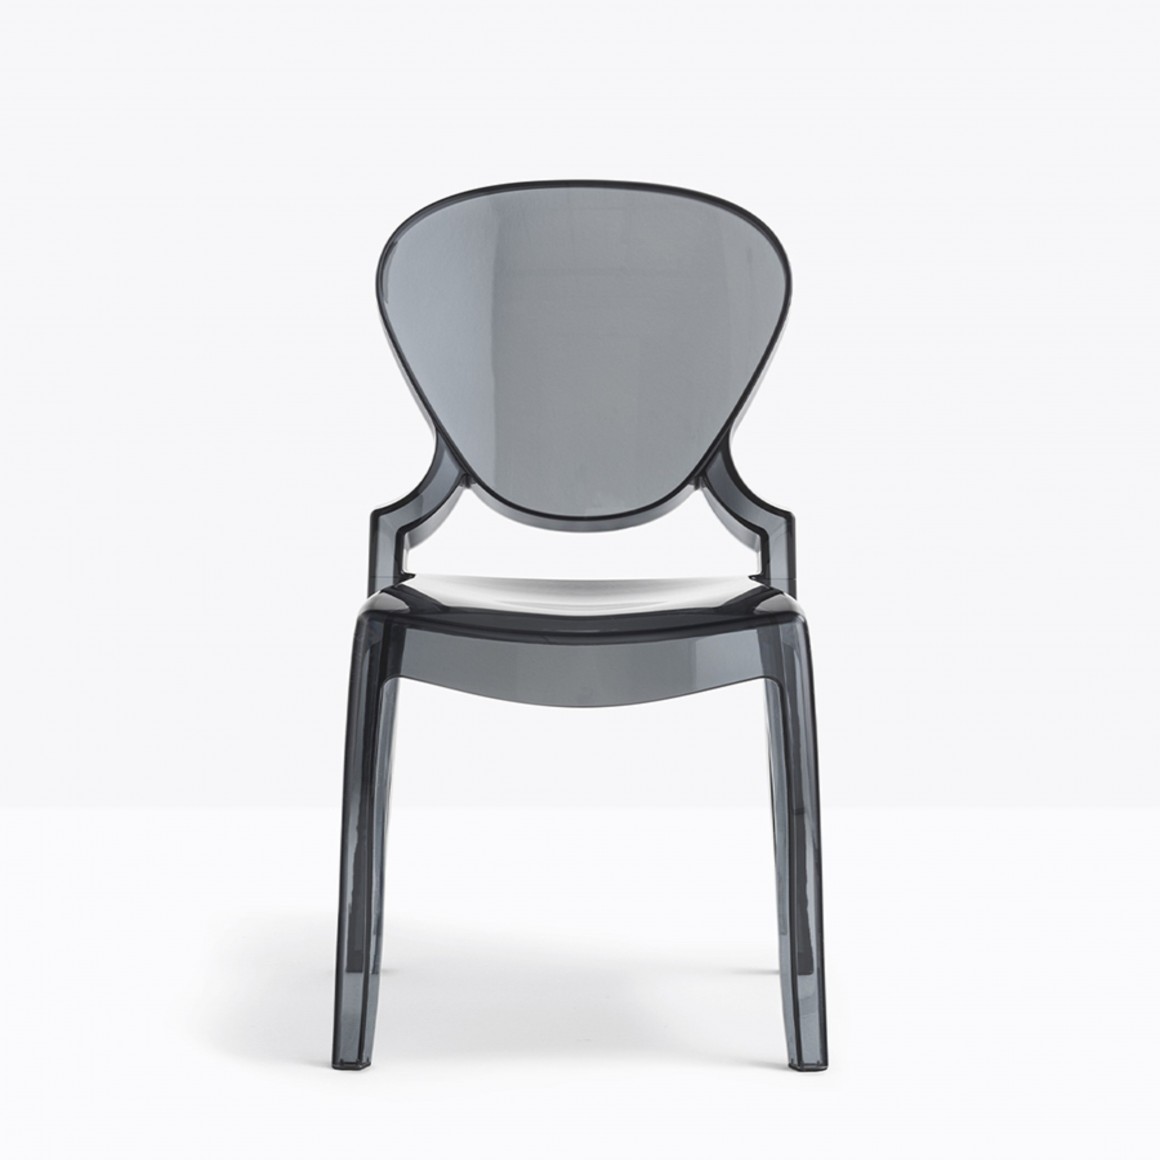 Chair QUEEN, fume polycarbonate